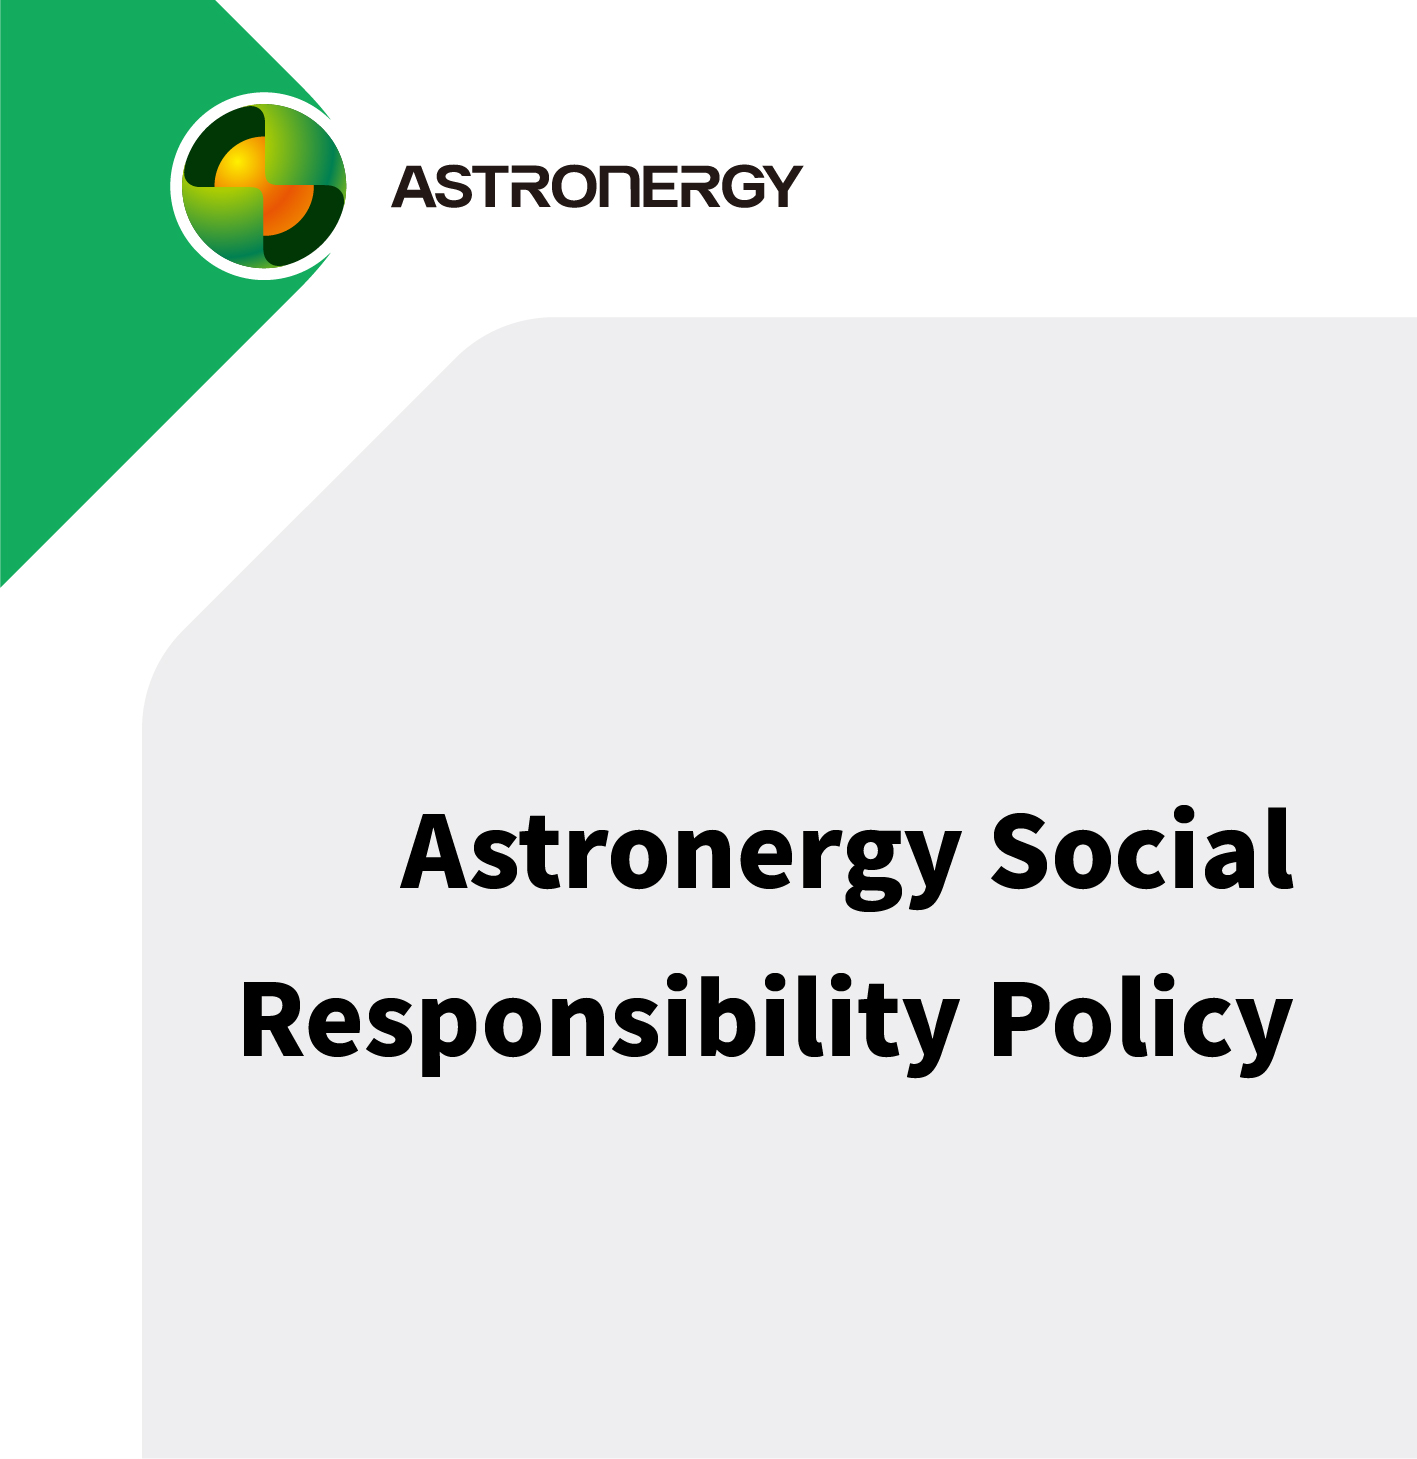 Astronergy Social Responsibility Policy